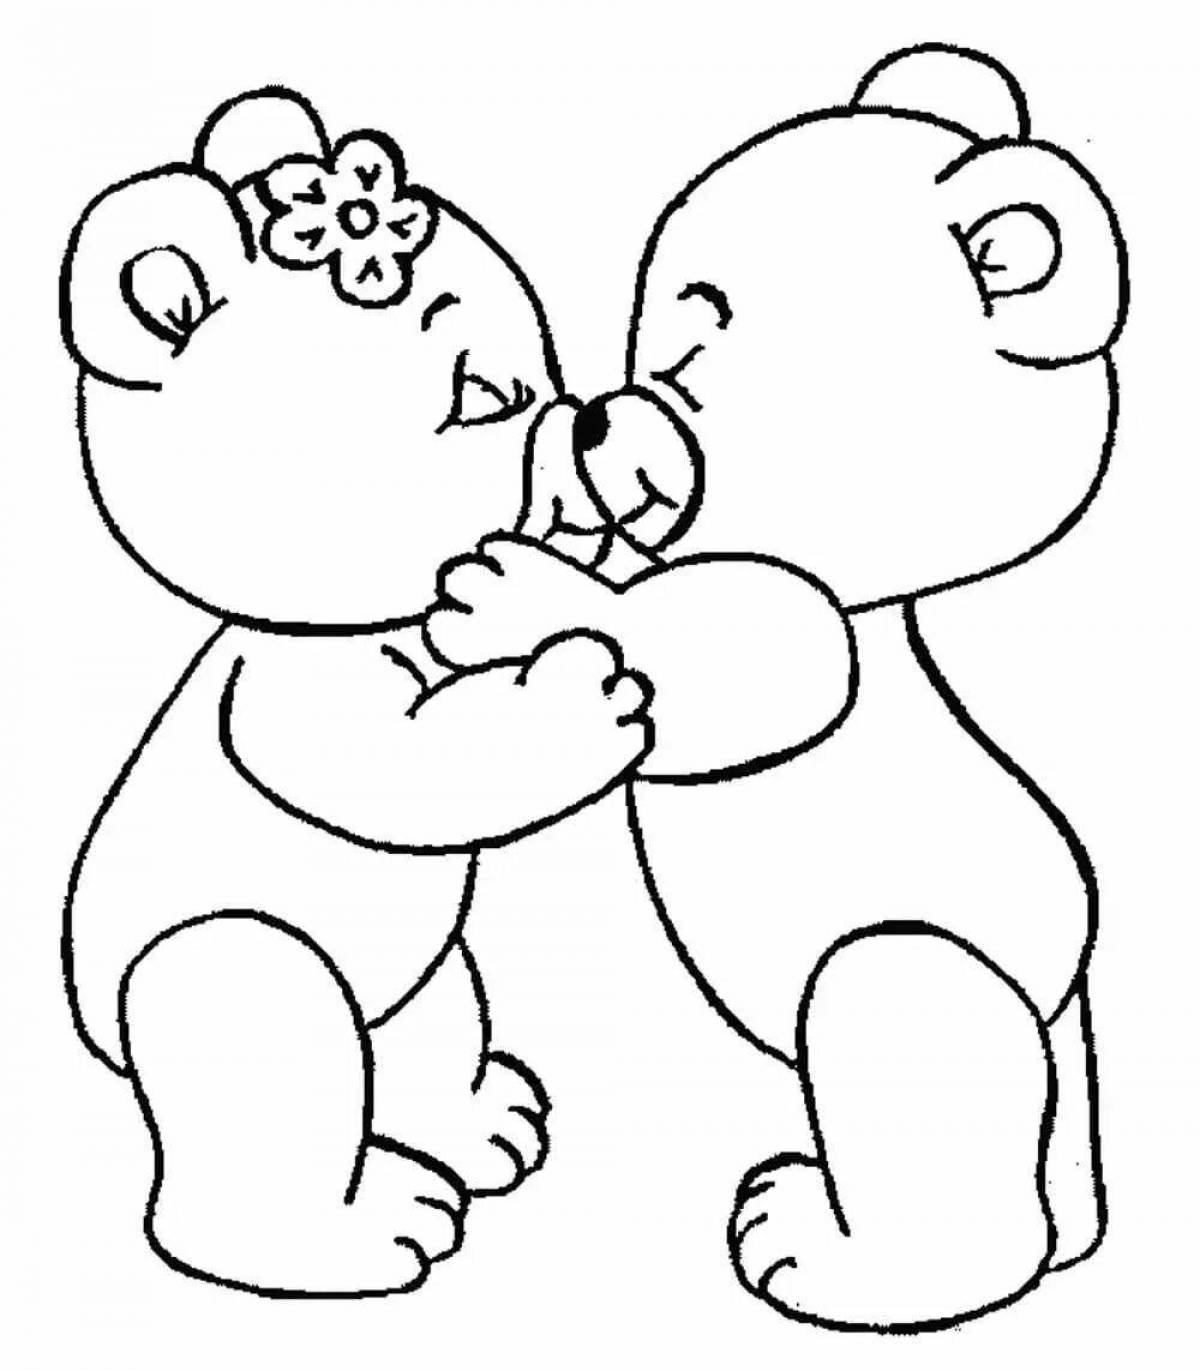 Teddy bear with heart coloring book